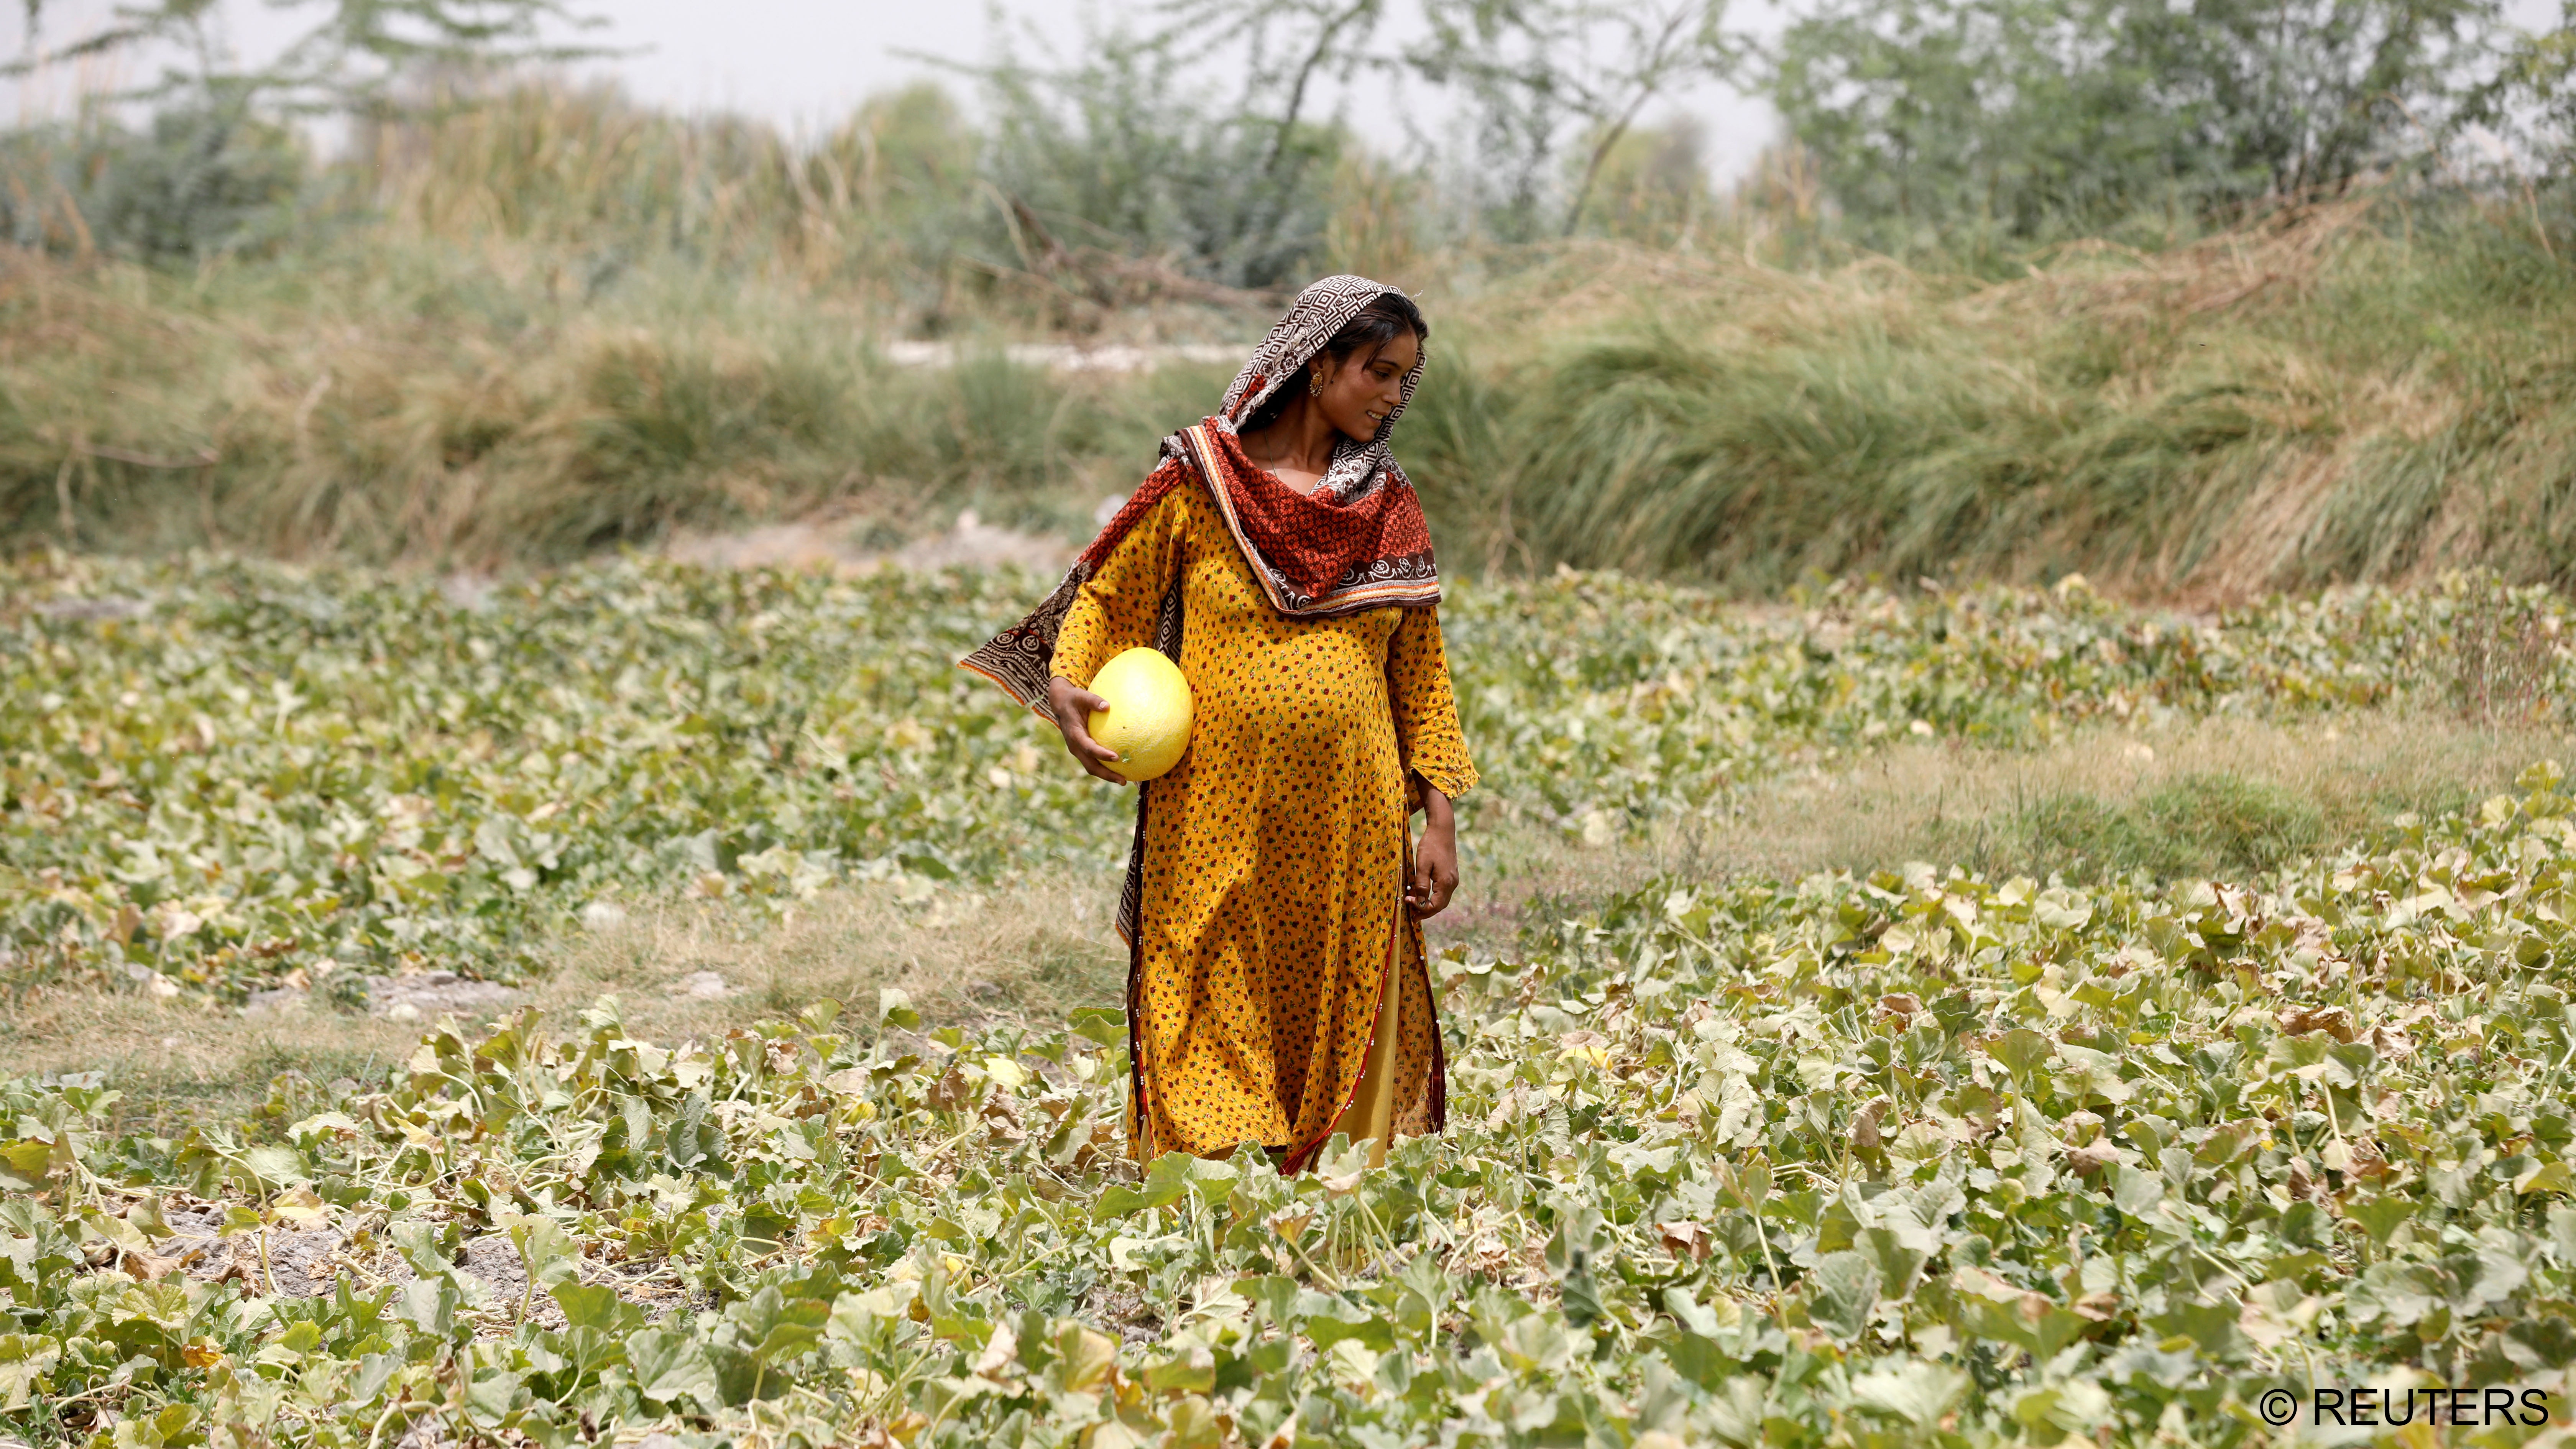 Sonari collects muskmelons at a farm on the outskirts of Jacobabad (photo: Reuters/Akhtar Soomro)